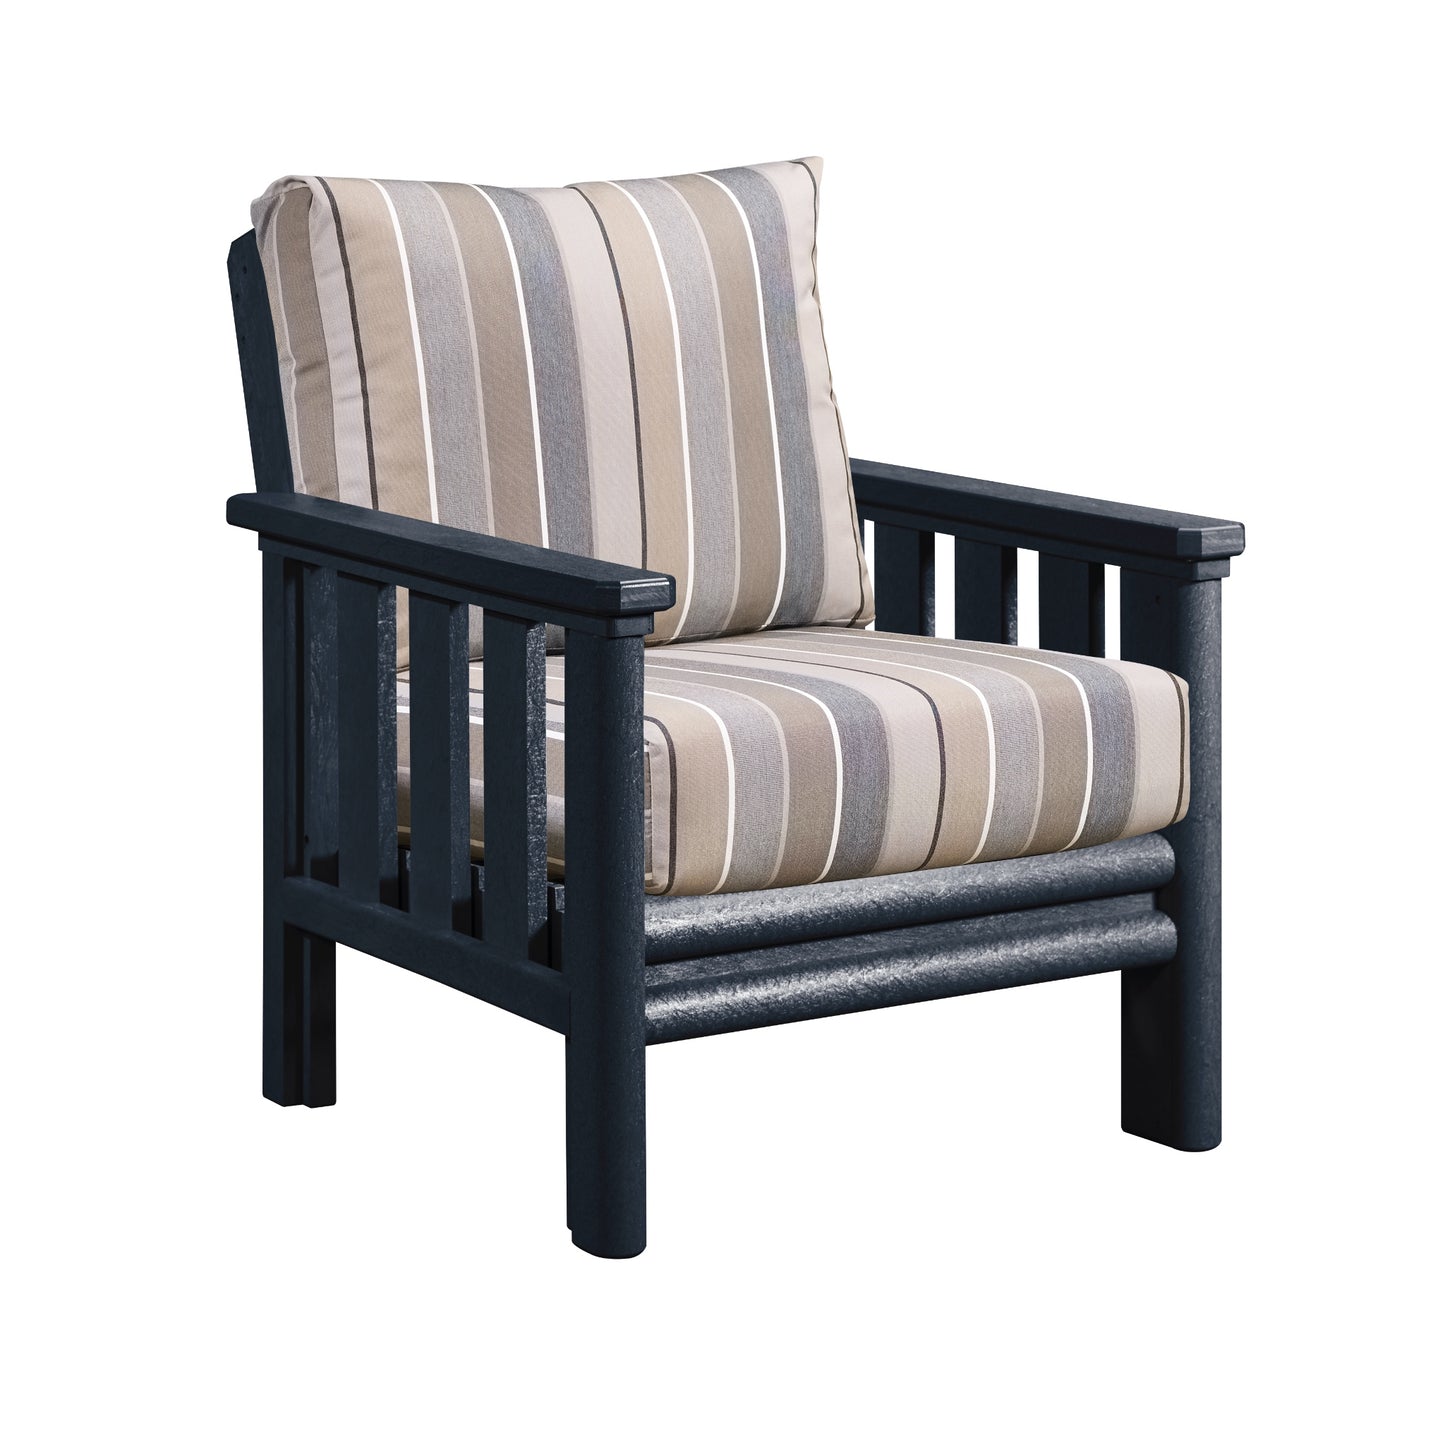 Stratford Arm Chair - BLACK FRAME WITH CUSHIONS - DSF261-14 [DSF141]